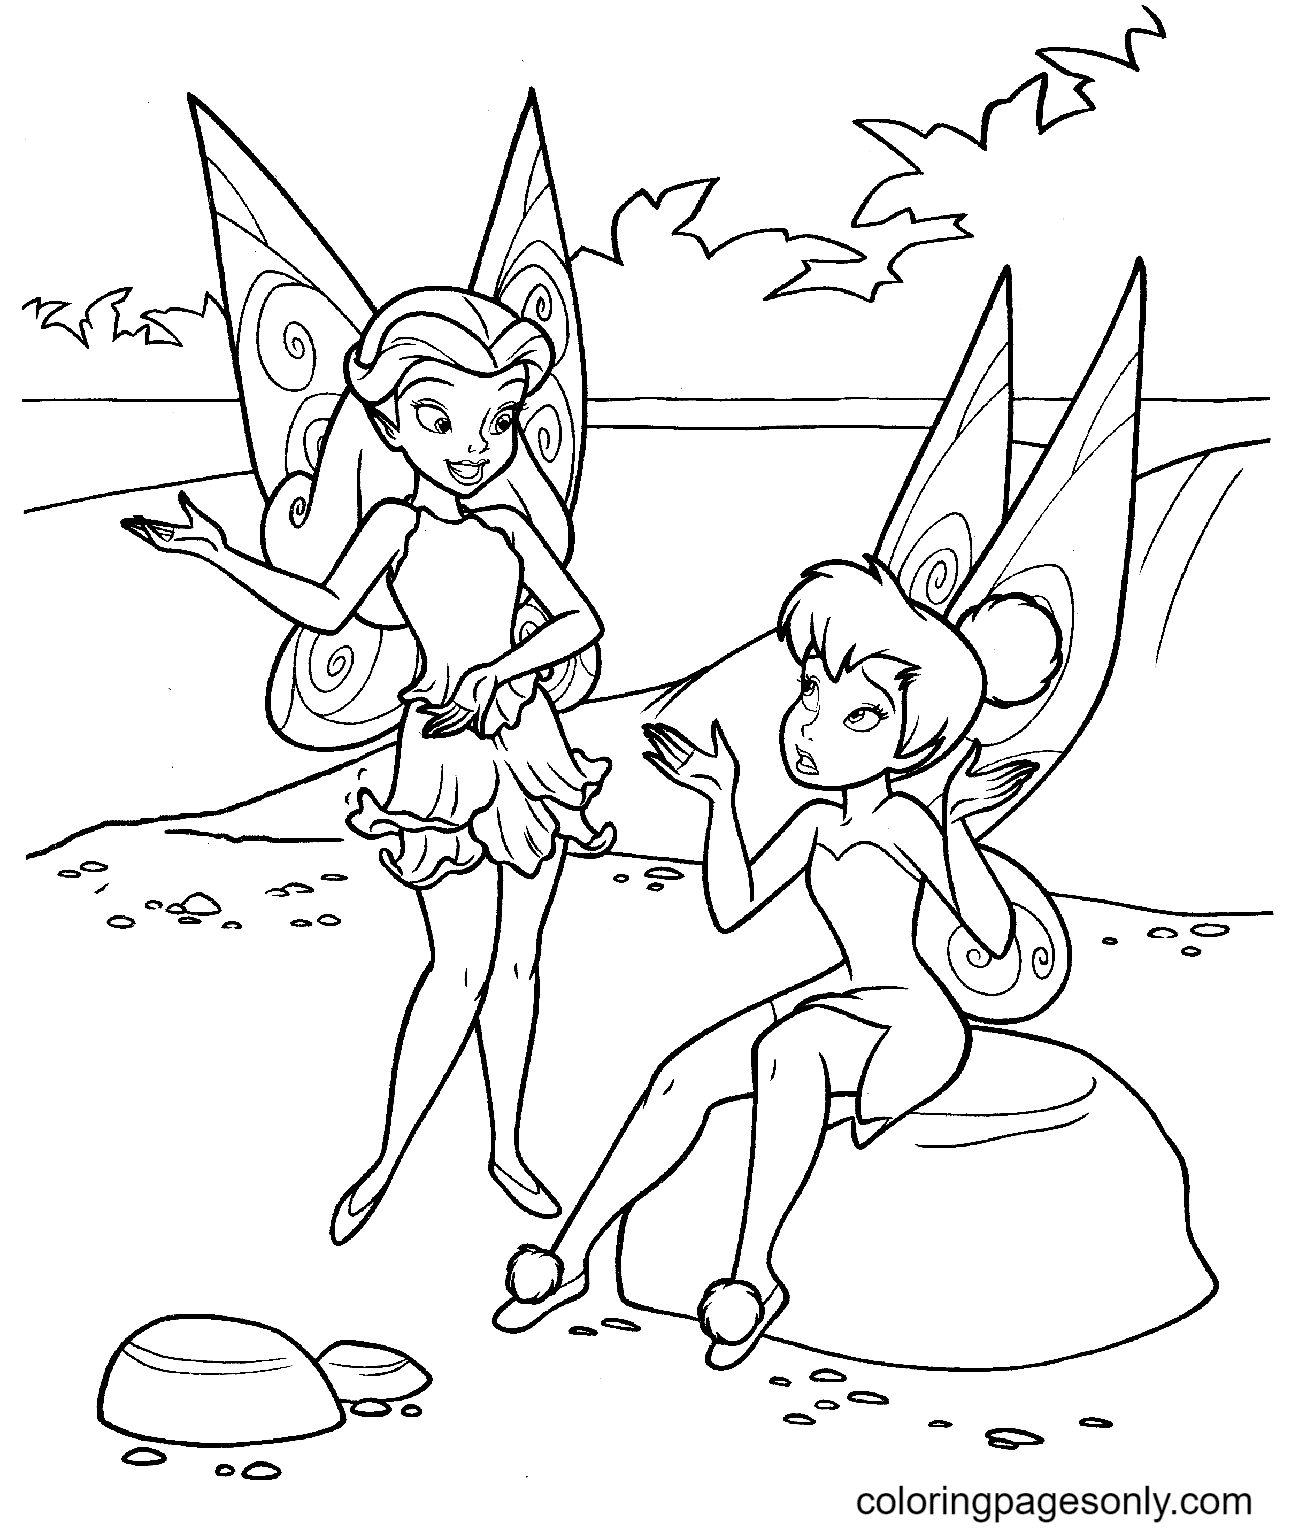 Tinkerbell And Rosetta Coloring Pages